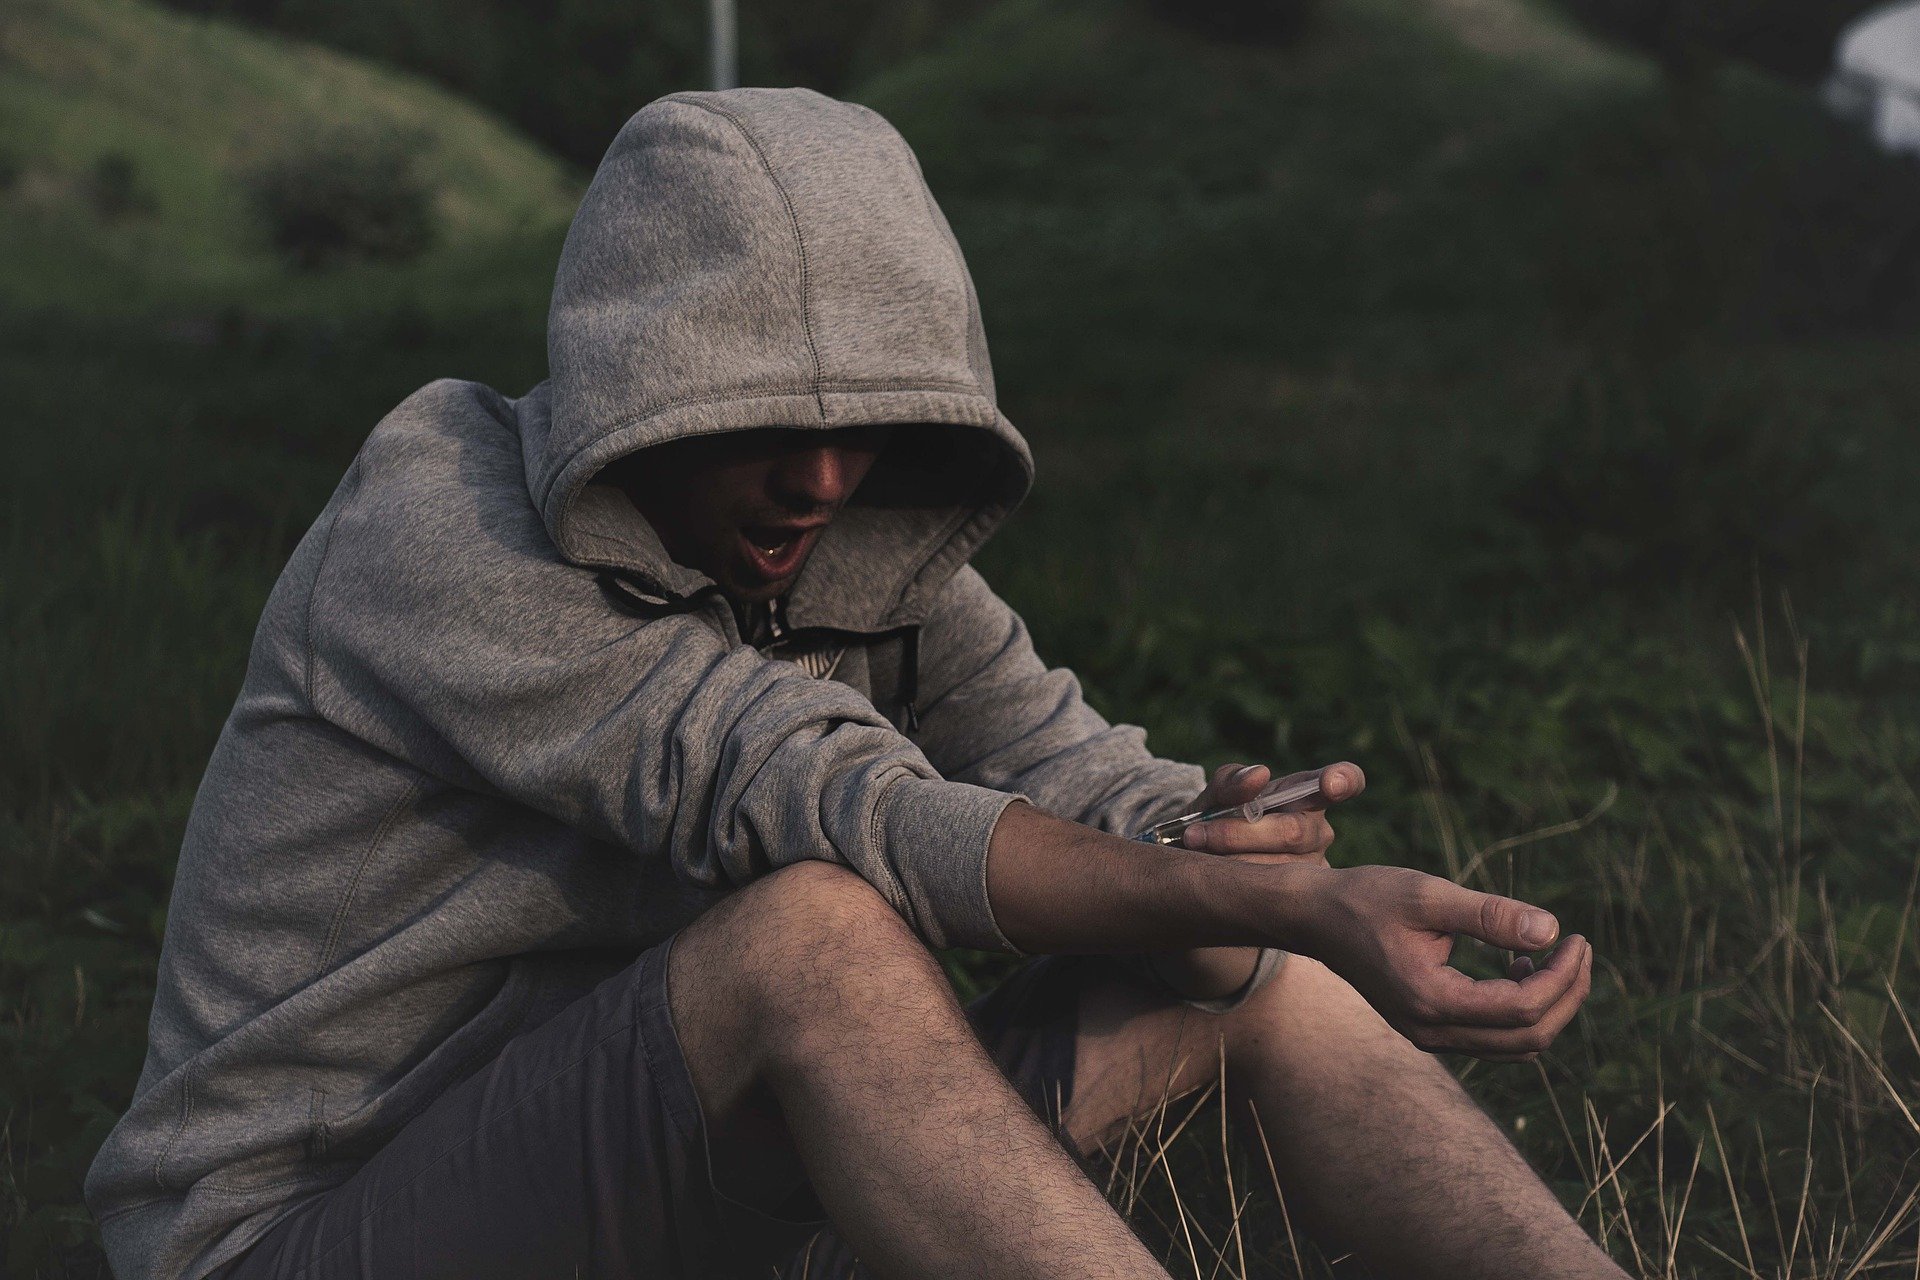 The UK Government has announced a multi-million pound funding plan to support rough sleepers struggling with drug and alcohol dependency.